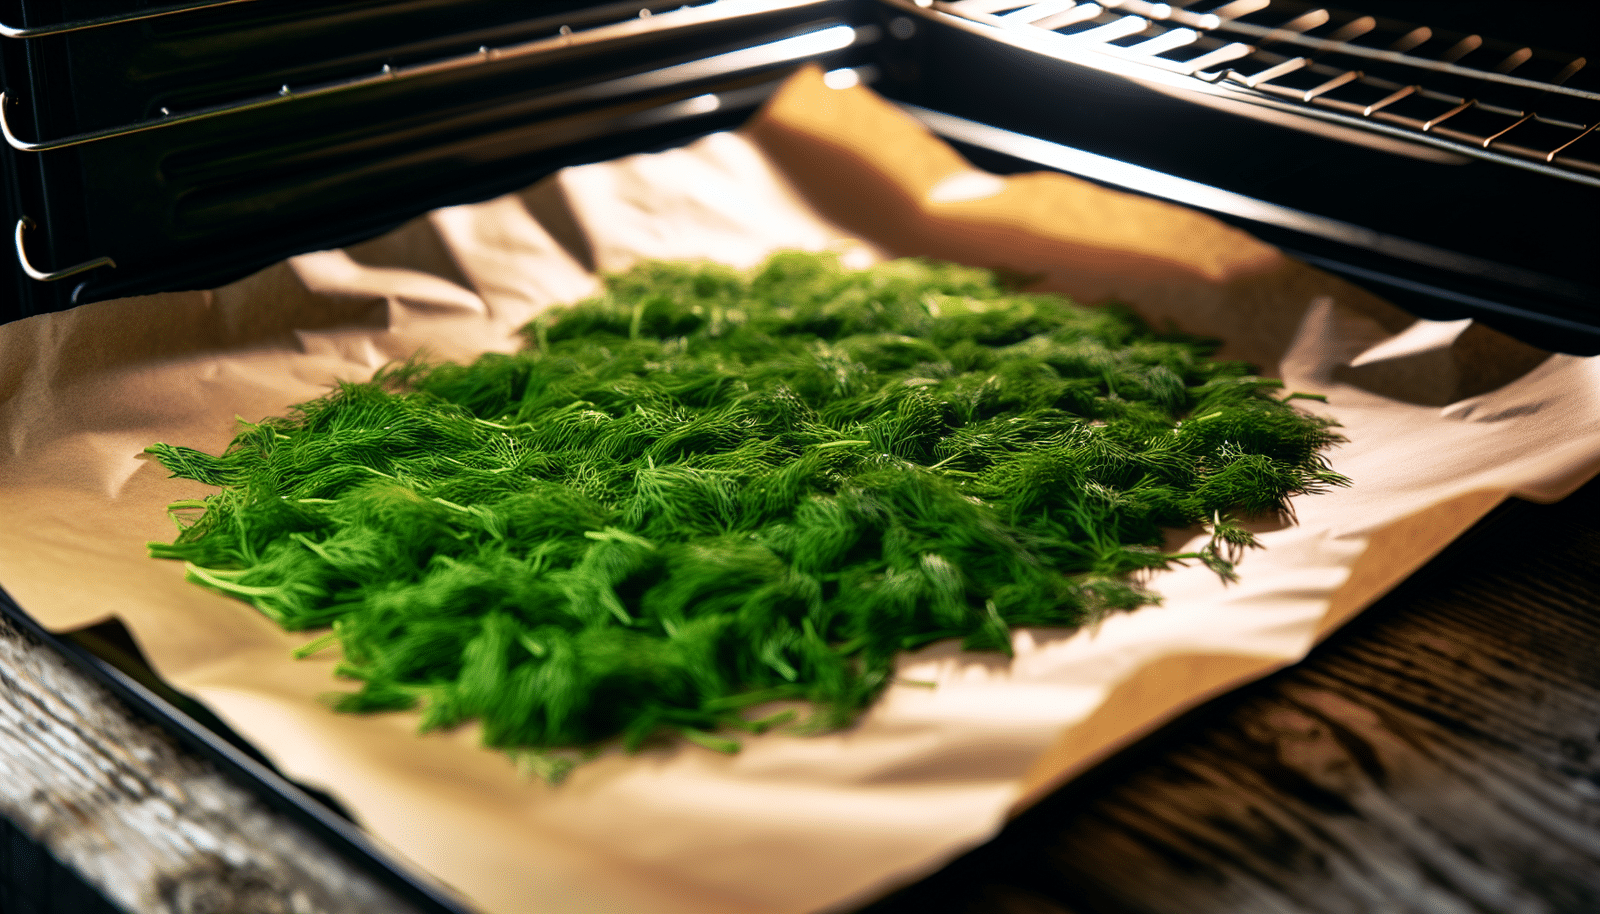 Oven drying dill on parchment paper